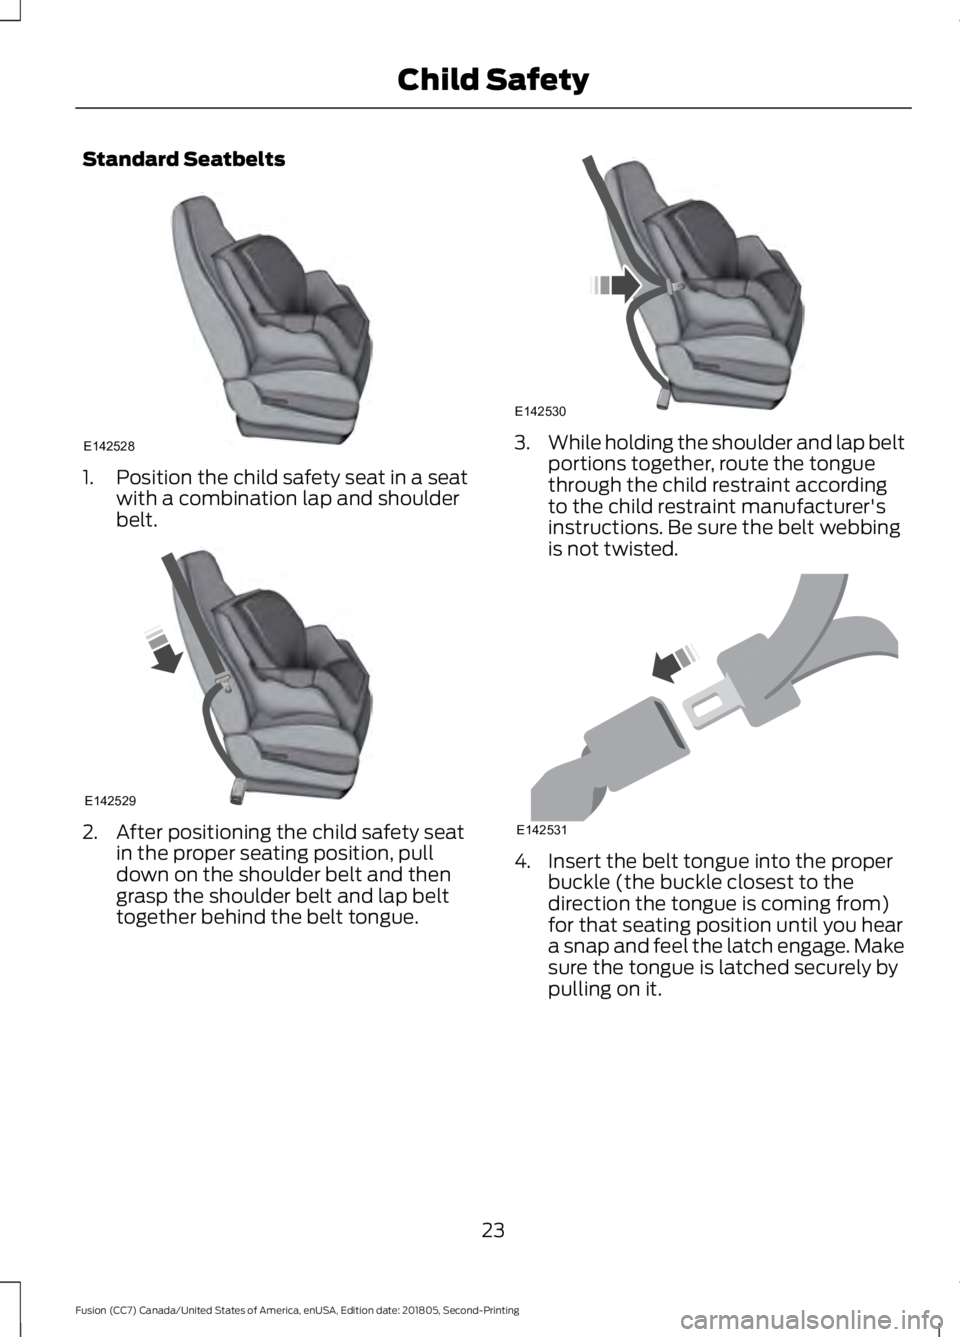 FORD FUSION 2019  Owners Manual Standard Seatbelts
1. Position the child safety seat in a seat
with a combination lap and shoulder
belt. 2. After positioning the child safety seat
in the proper seating position, pull
down on the sho